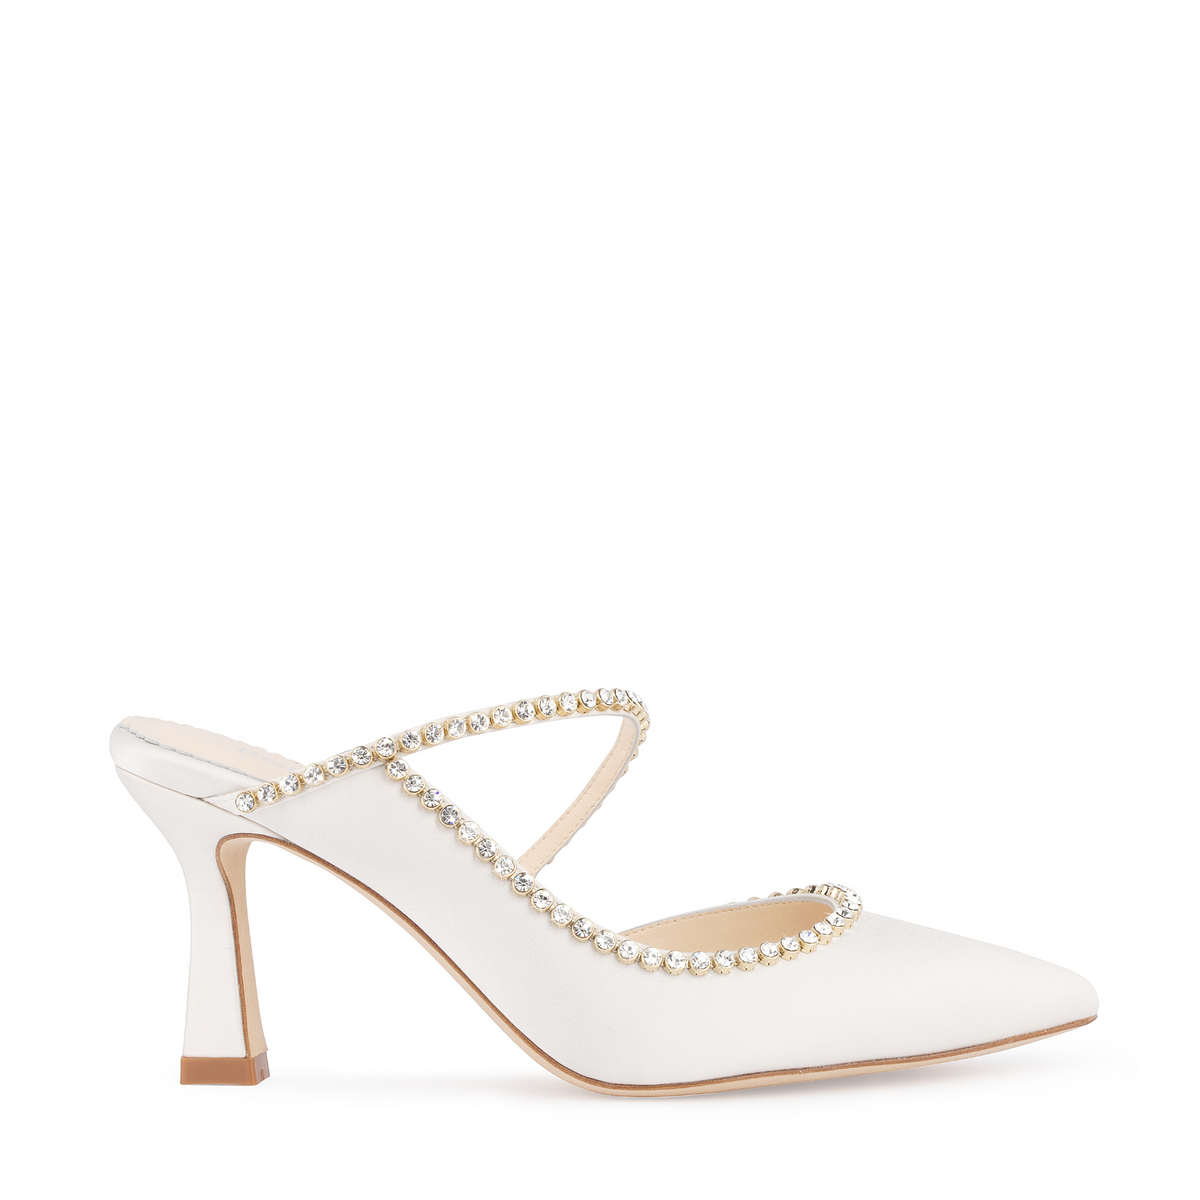 Hadley - Ivory Bridal Mules with Crystal Strap